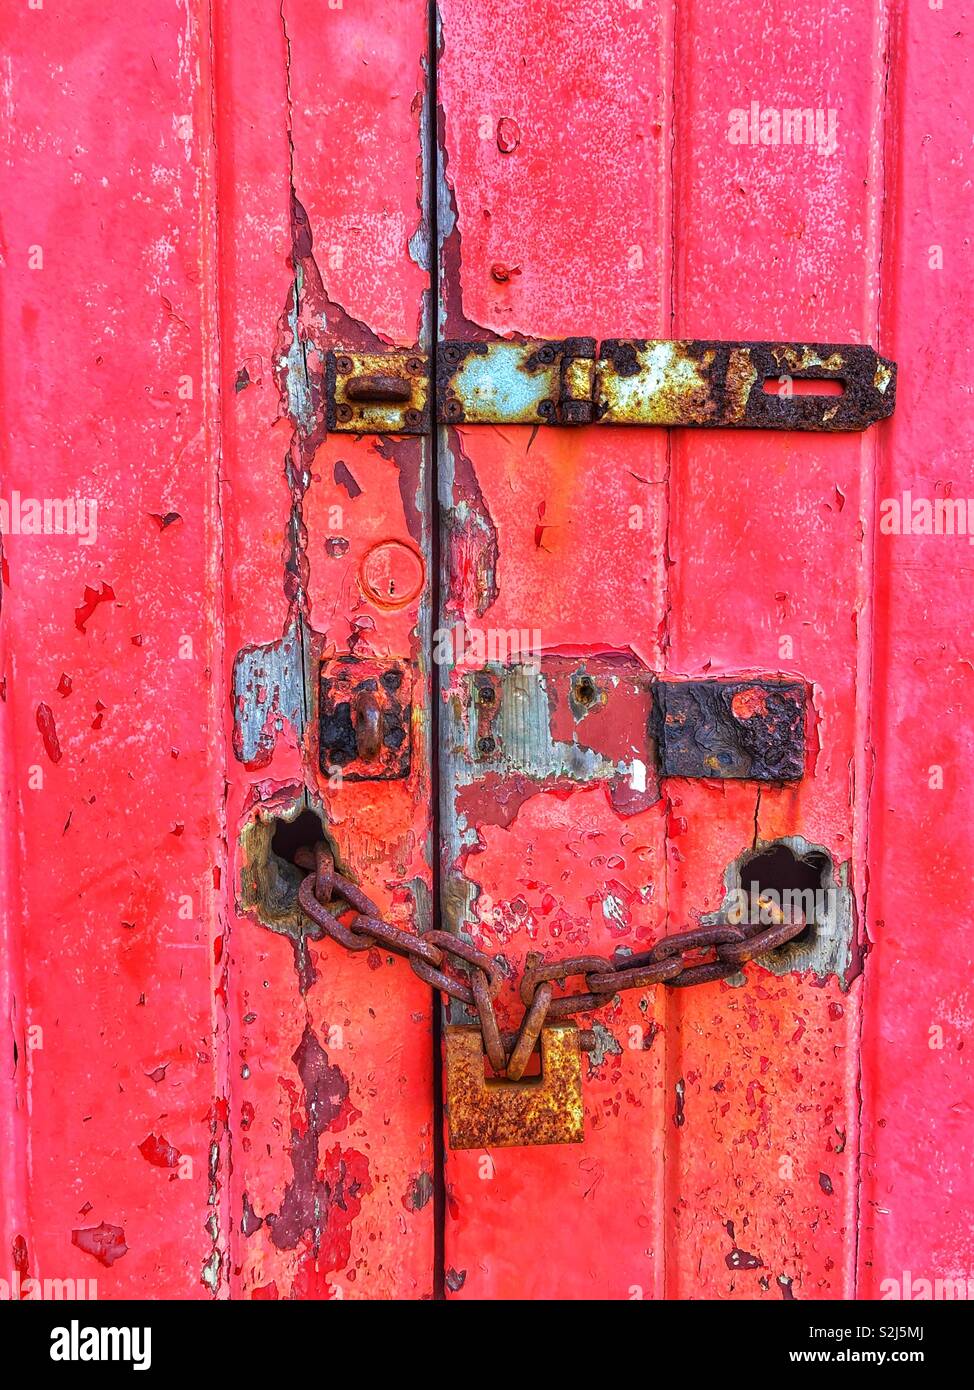 Old locks on an old garage door with peeling red paint Stock Photo - Alamy